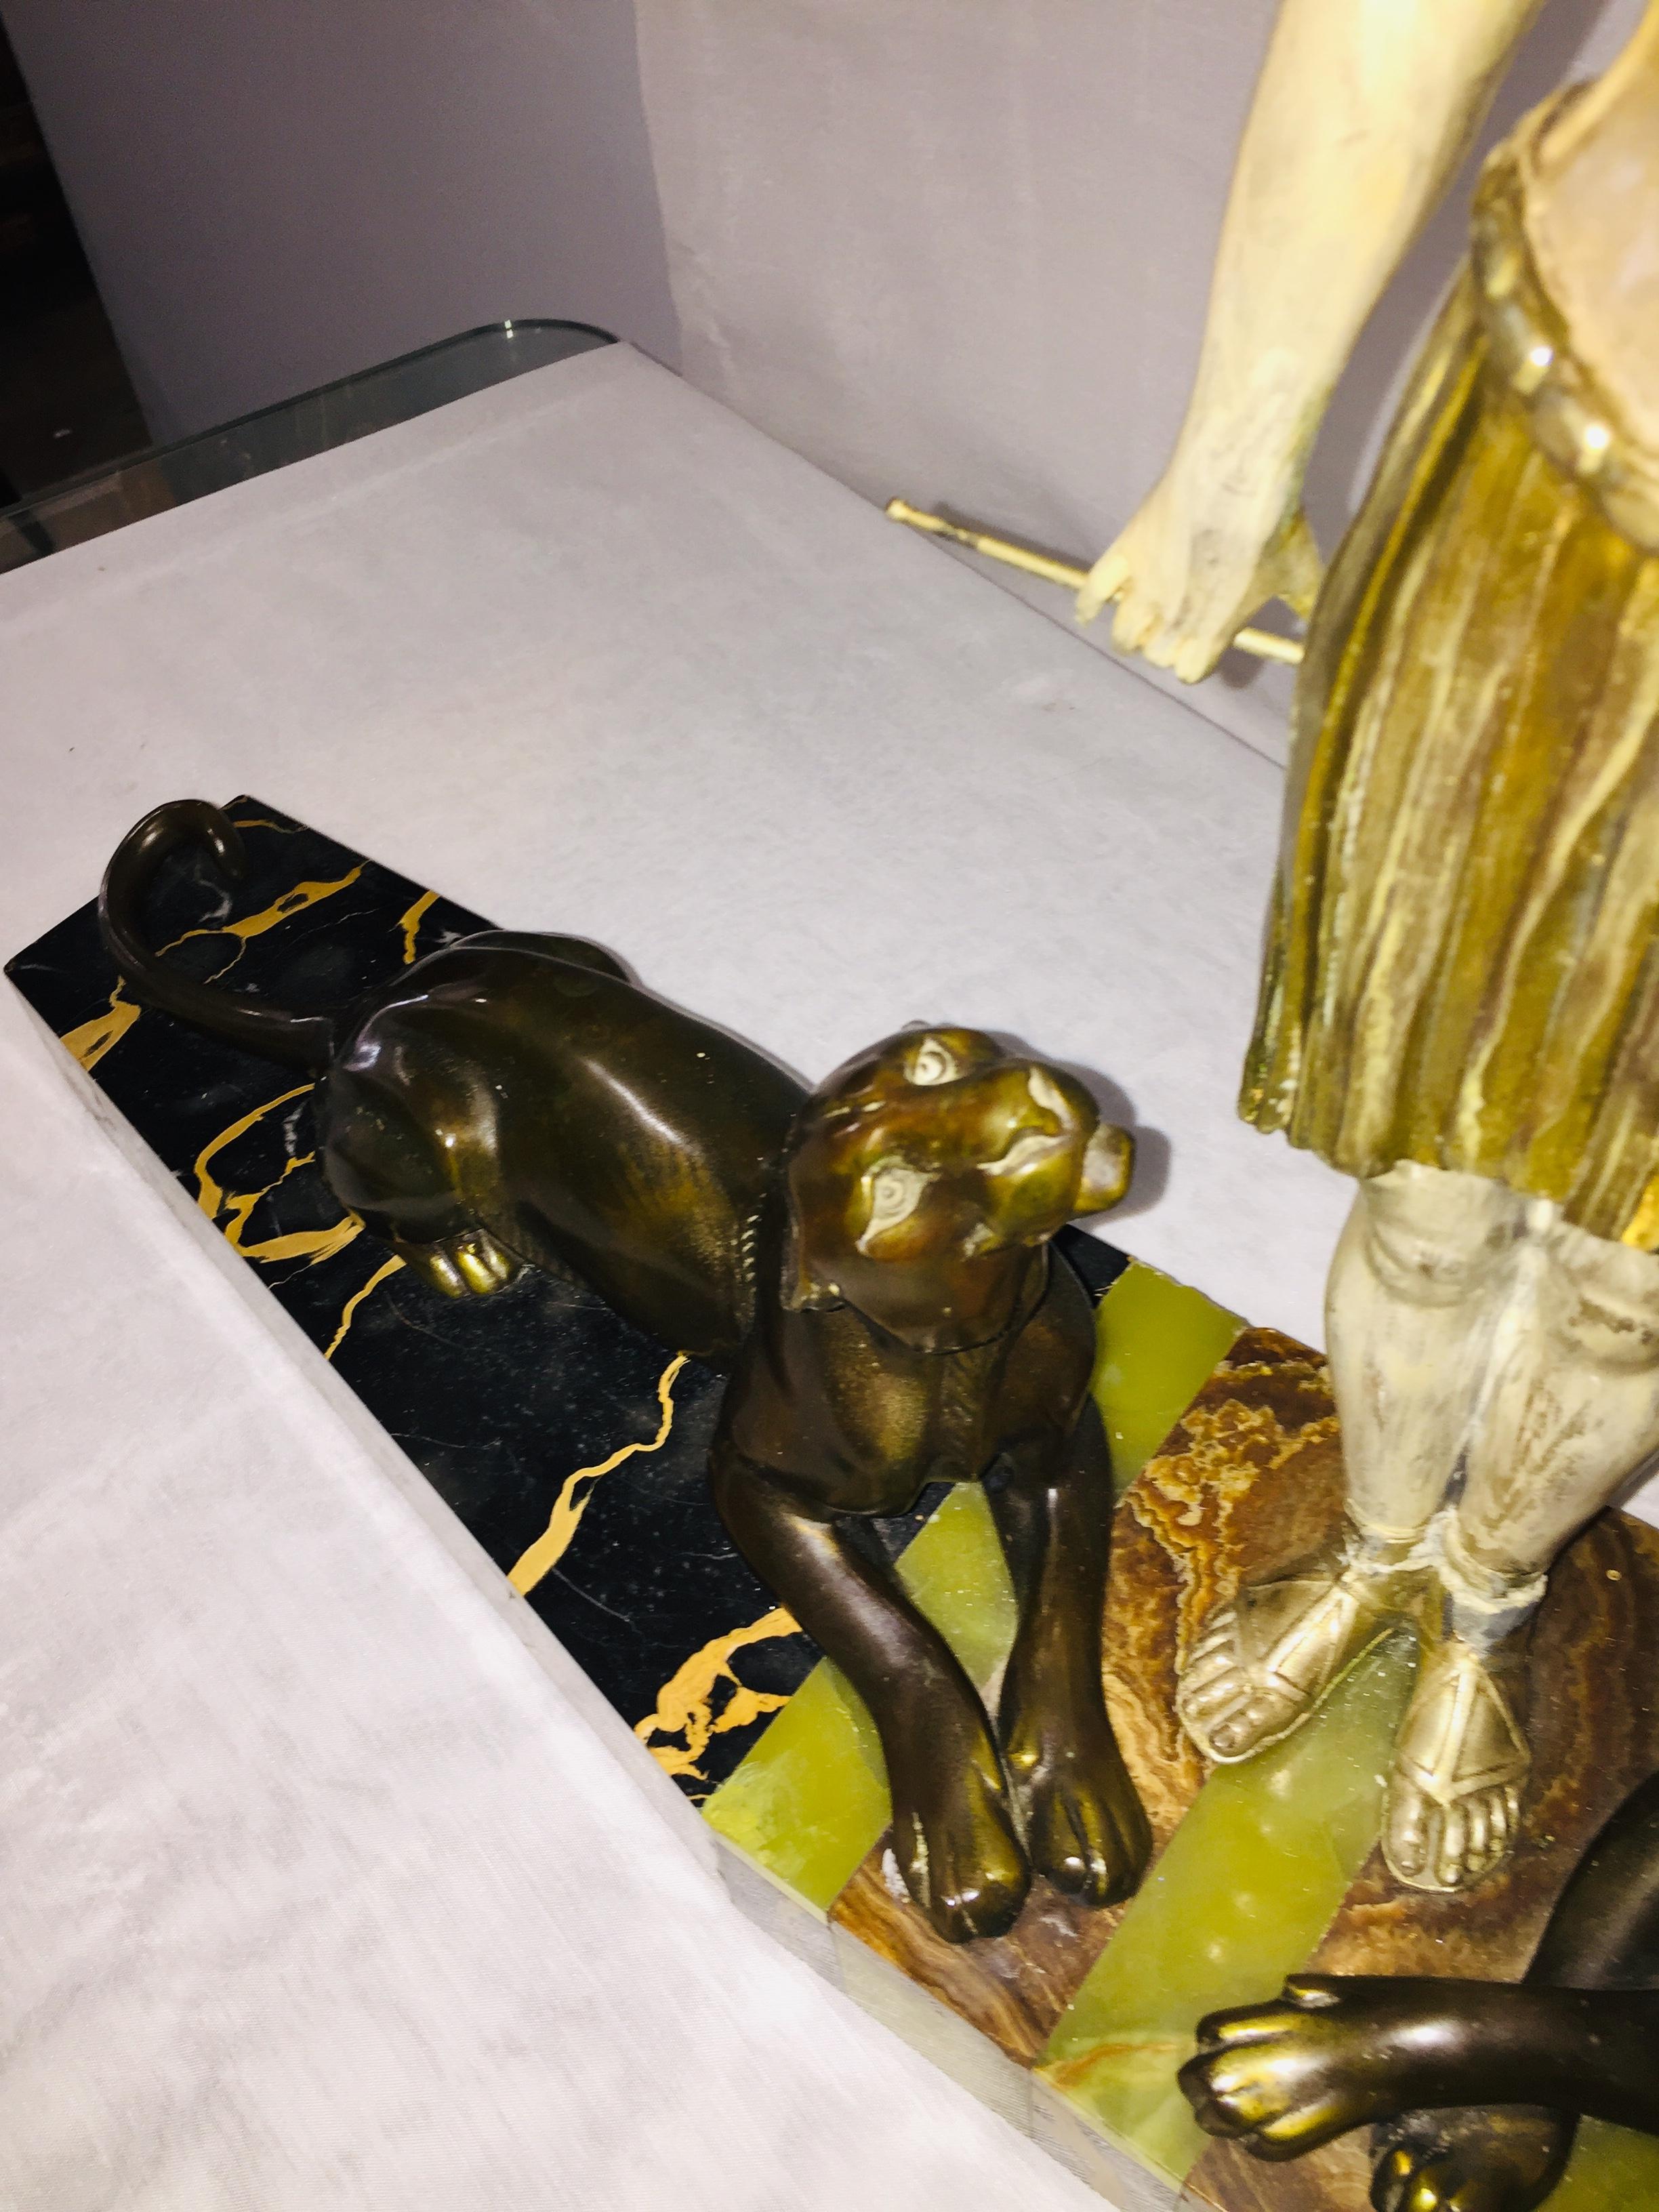 Female tamer figure with two panthers lying on each side of the marble base,
The two animals looking at her, she is wearing a typical dress from the fashion circa 1930.
Very expressive attitudes of the animals, strong Art Deco design for this